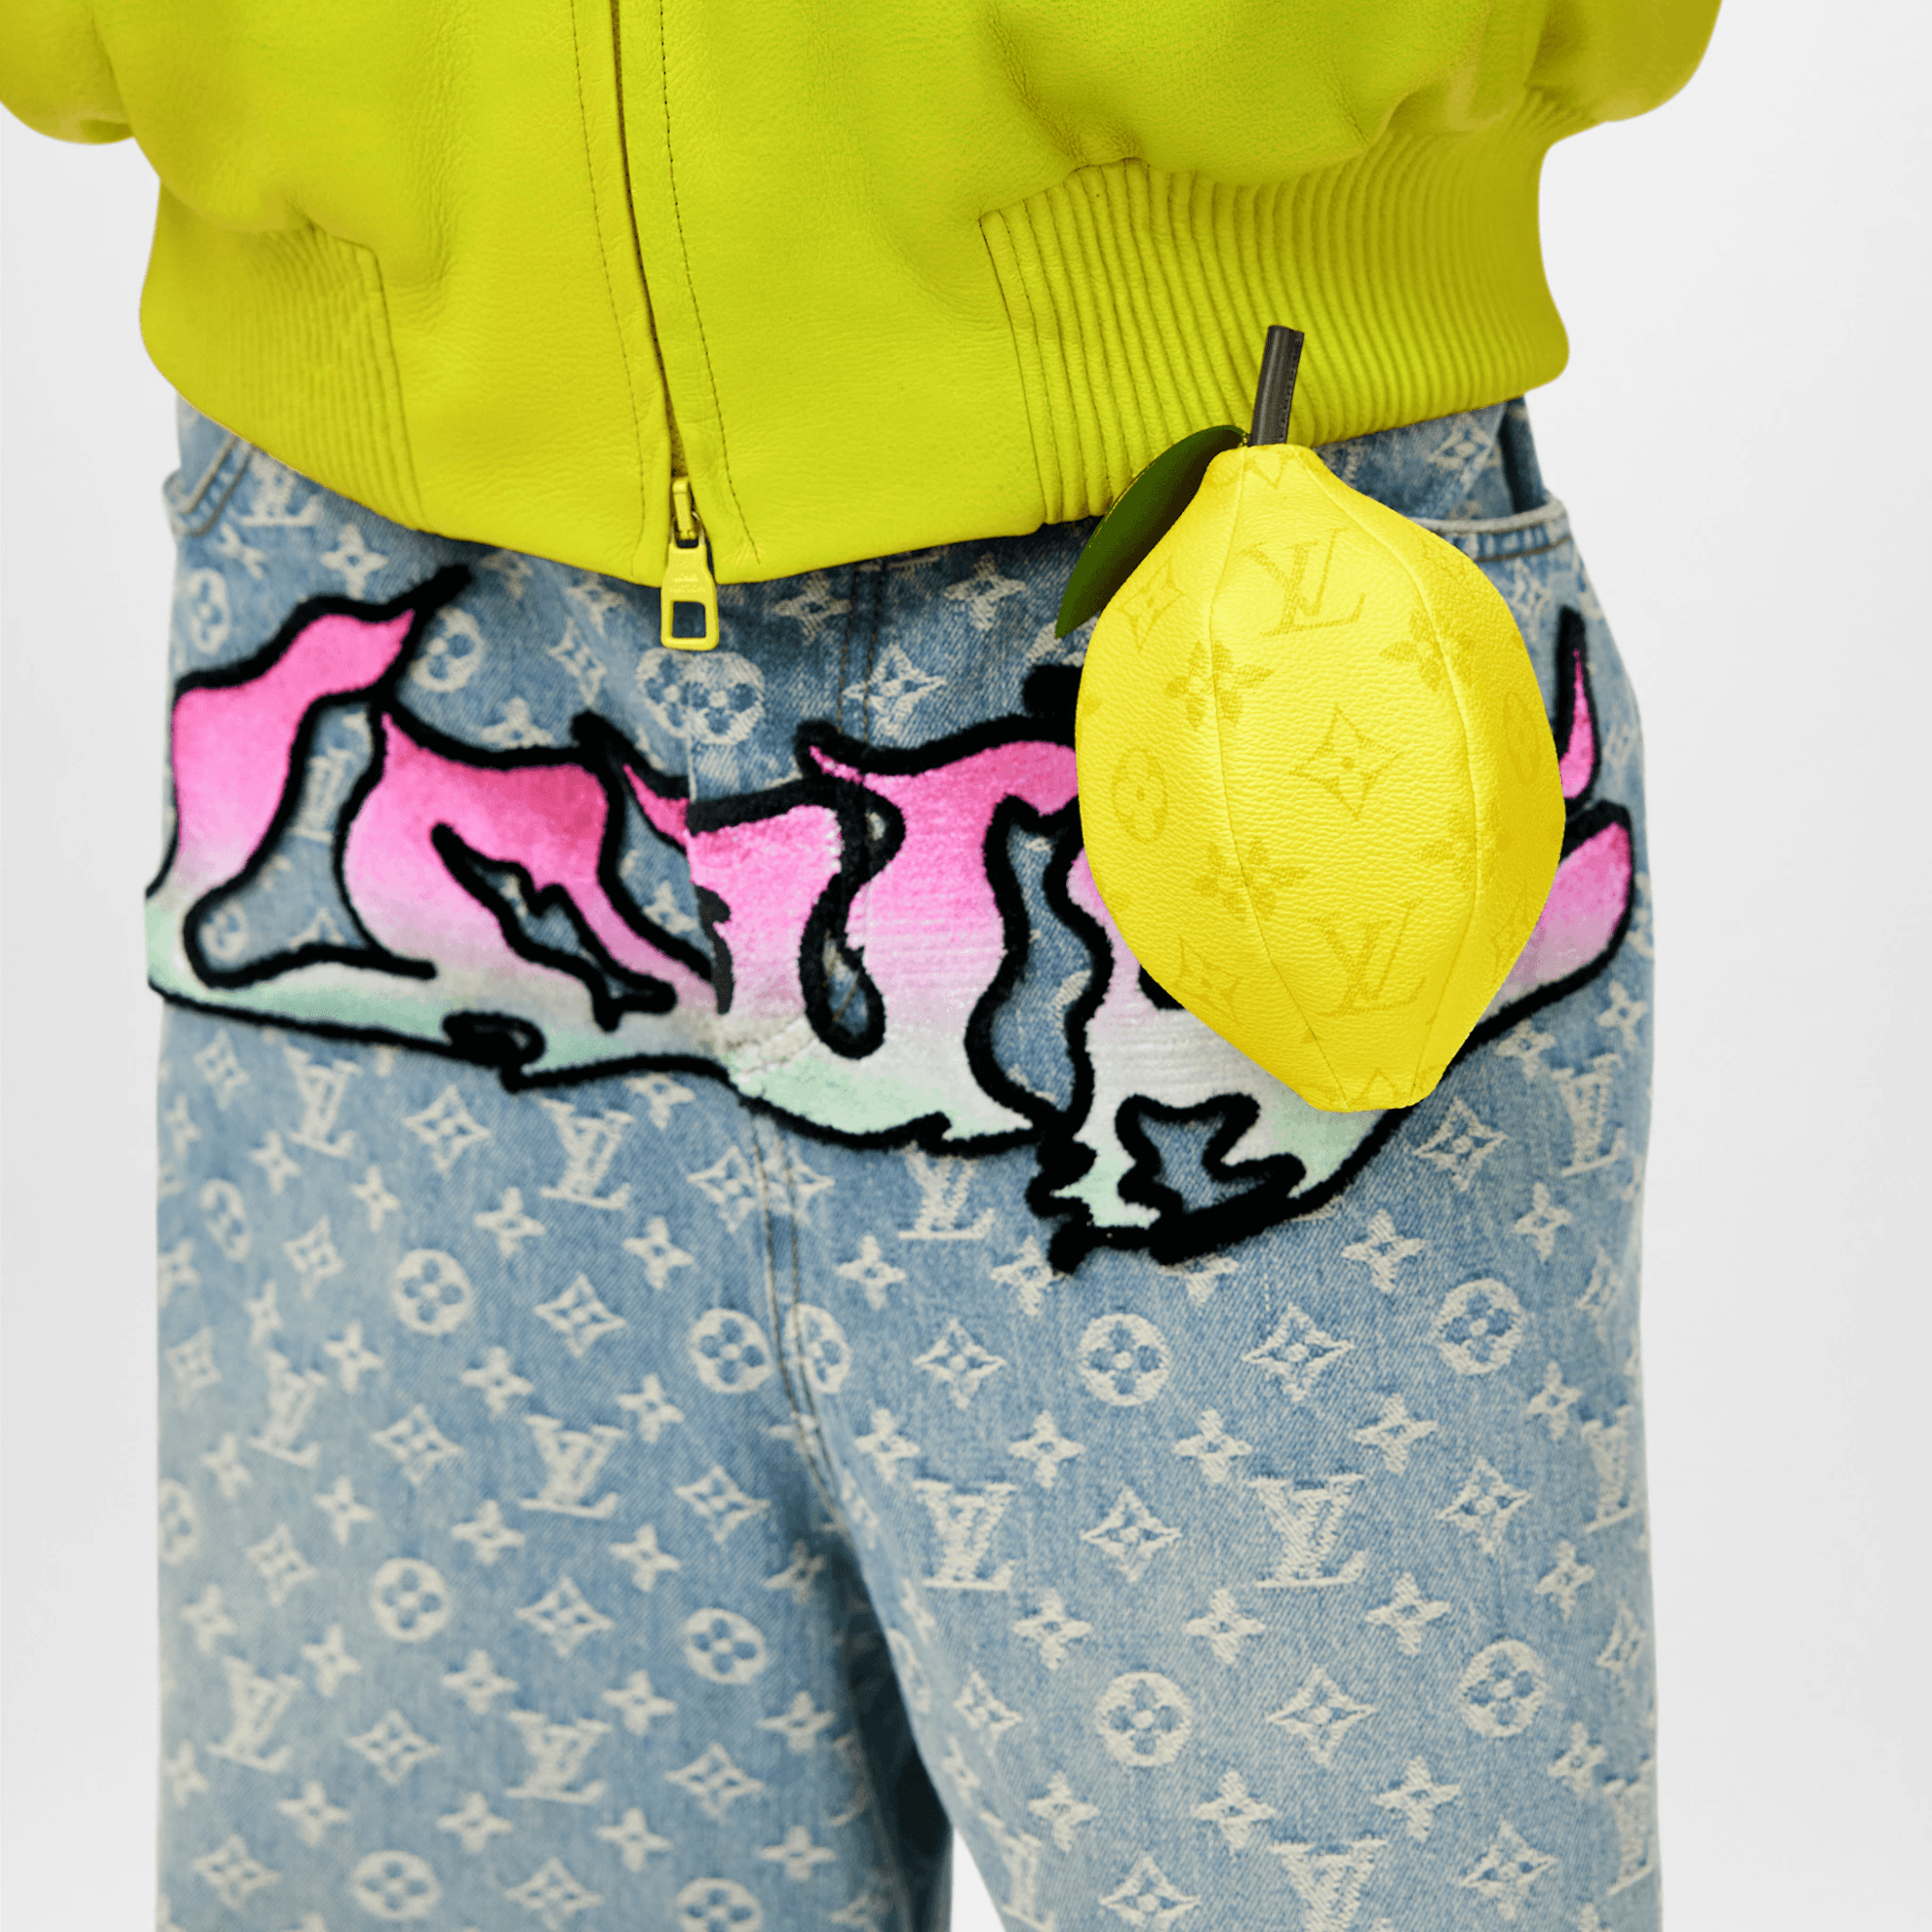 welcome on Instagram: Louis Vuitton Lemon and Carrot Bags (SS 2022)